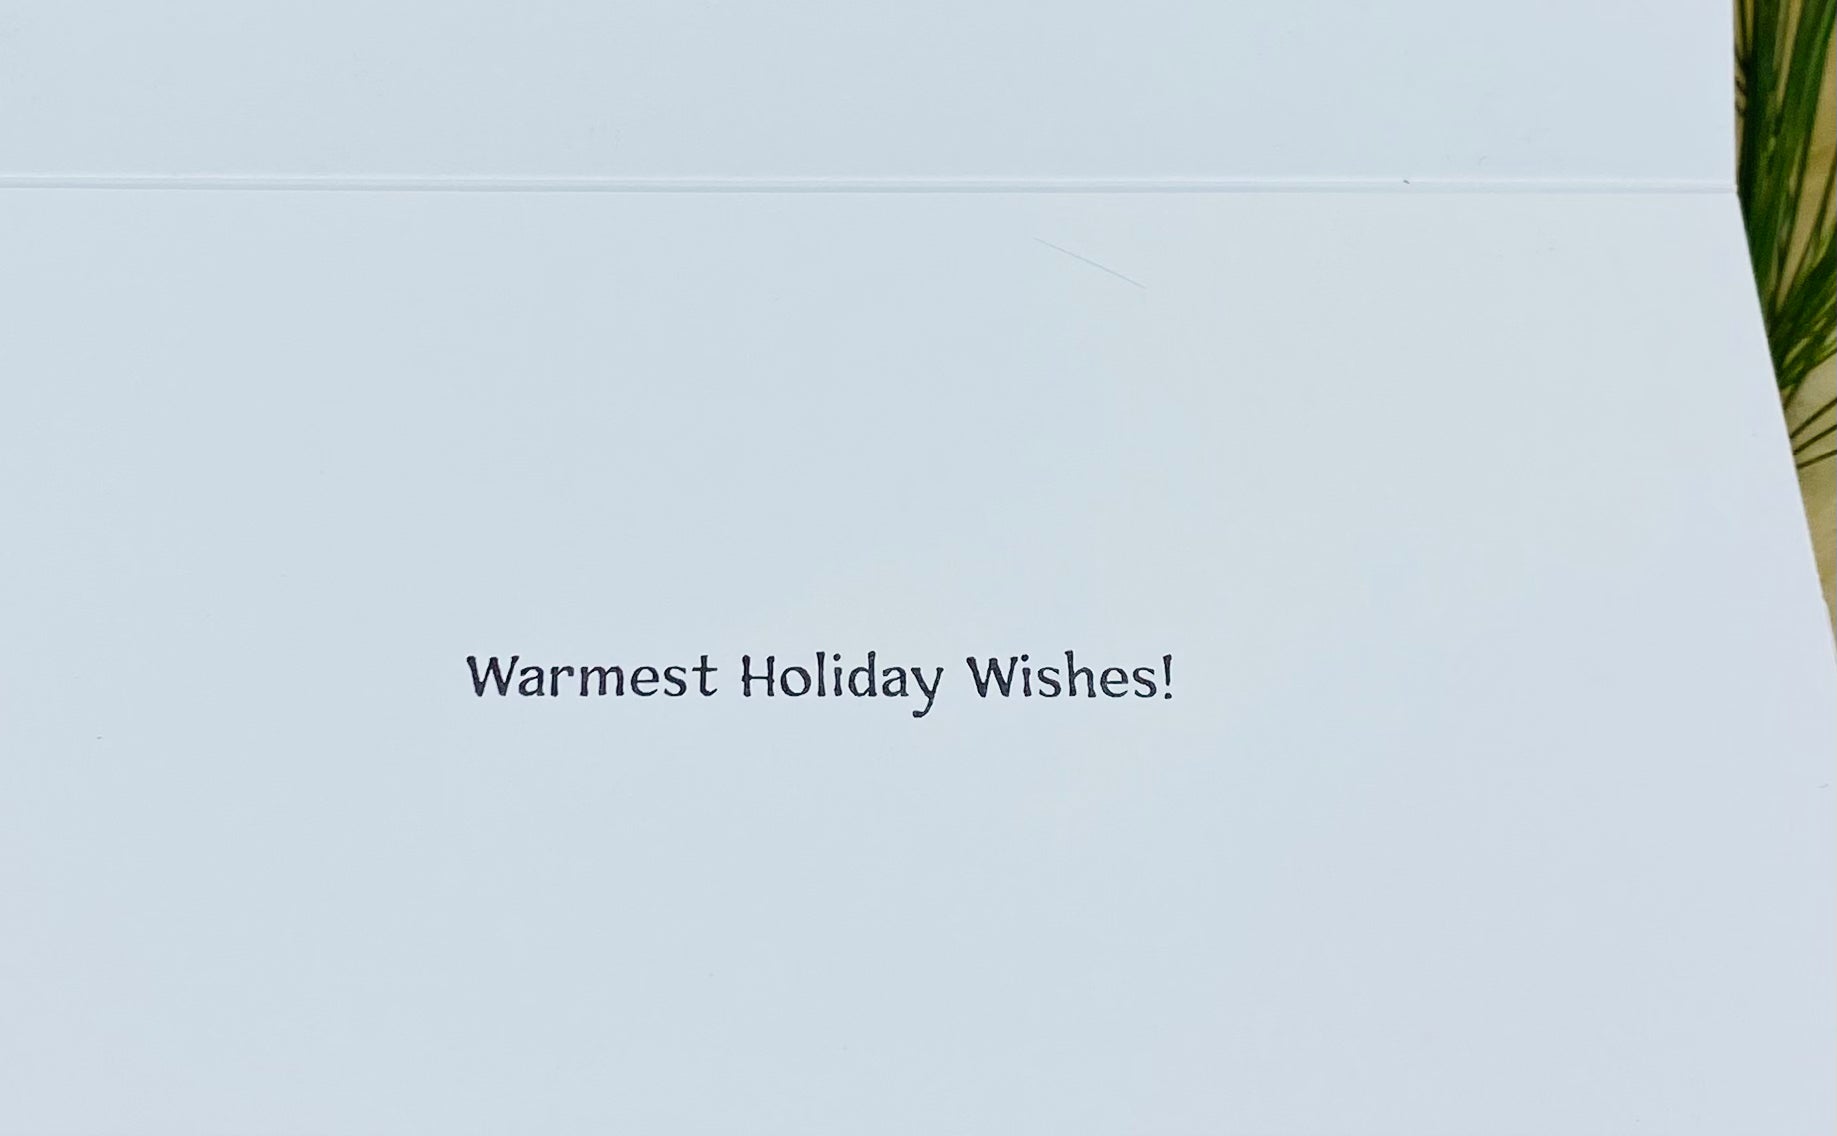 Warmest Holiday Wishes